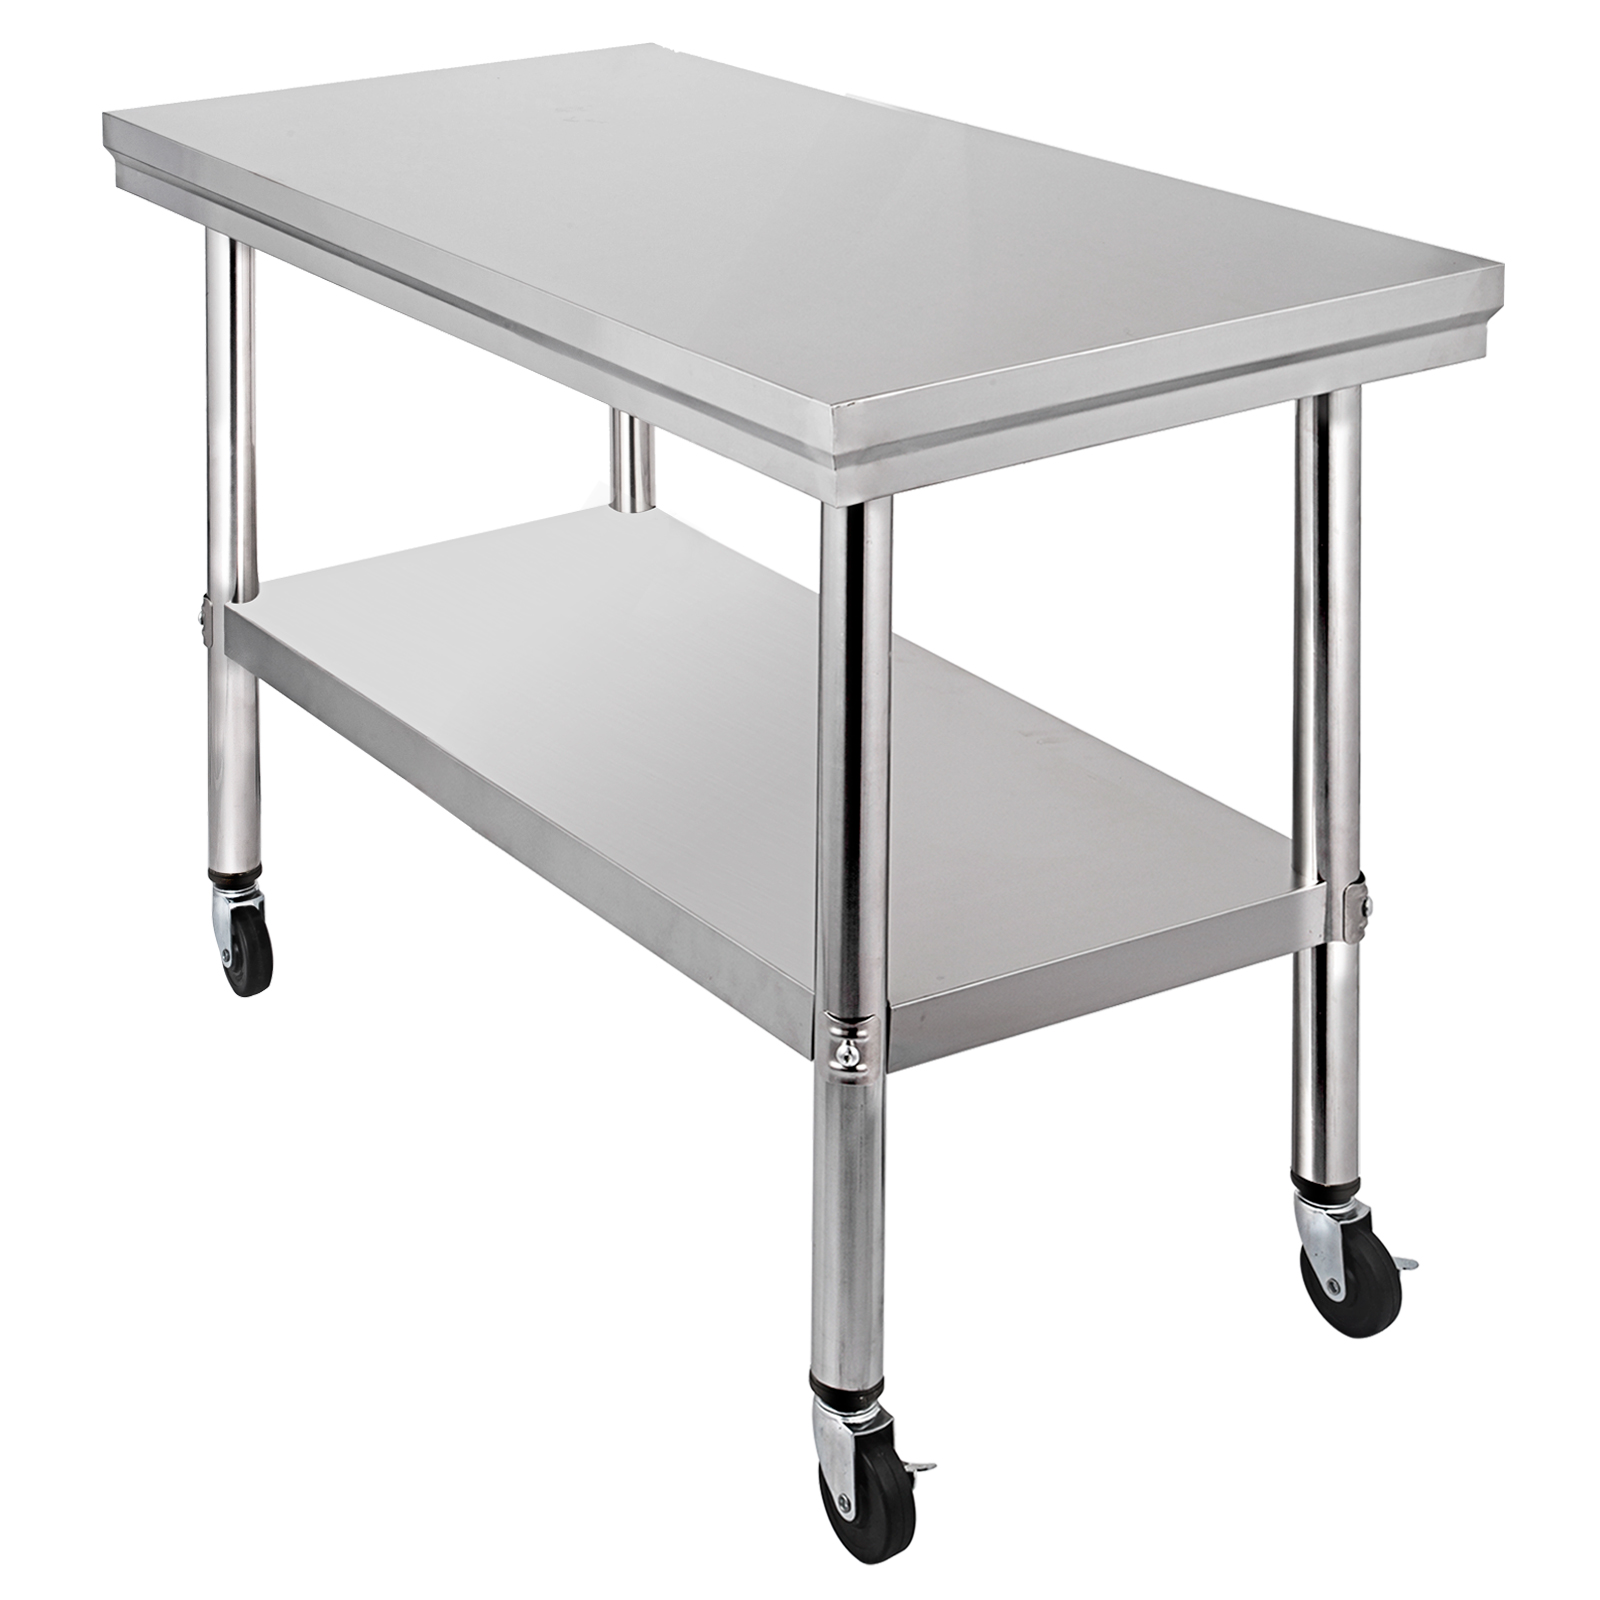 Stainless Steel Table With Wheels